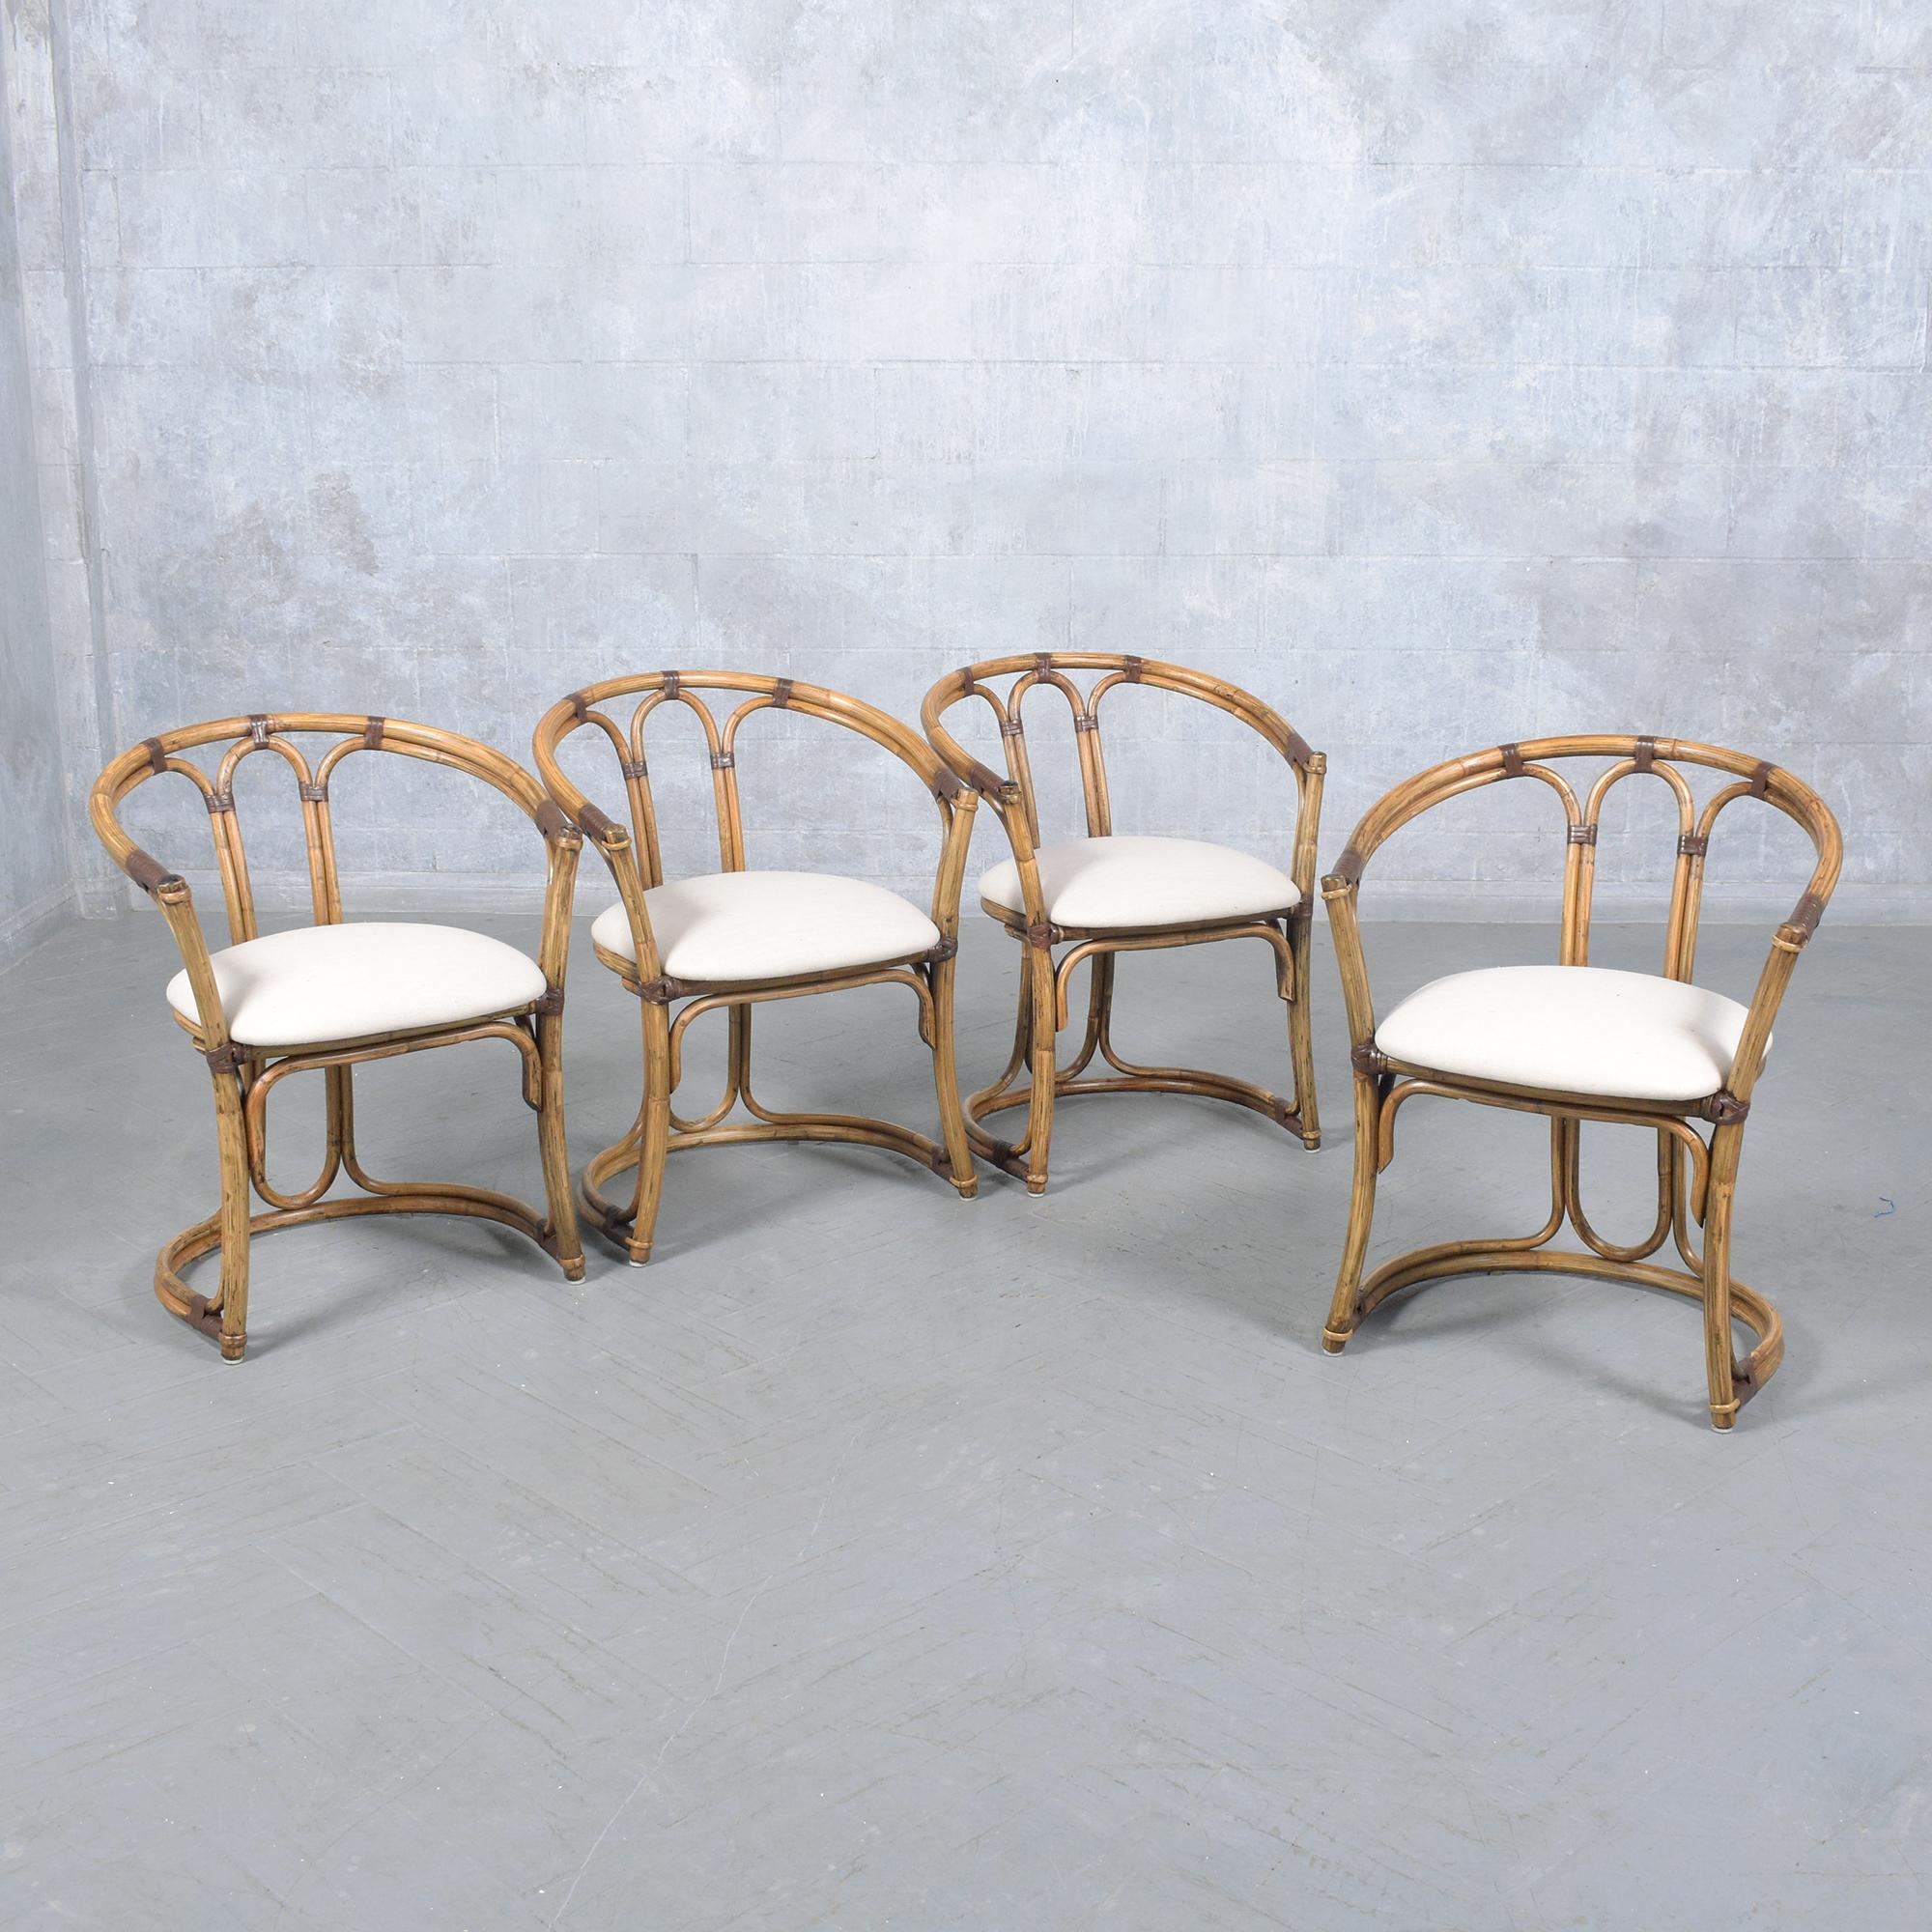 Organic Modern Restored Vintage Bamboo Barrel Armchairs - Set of Four For Sale